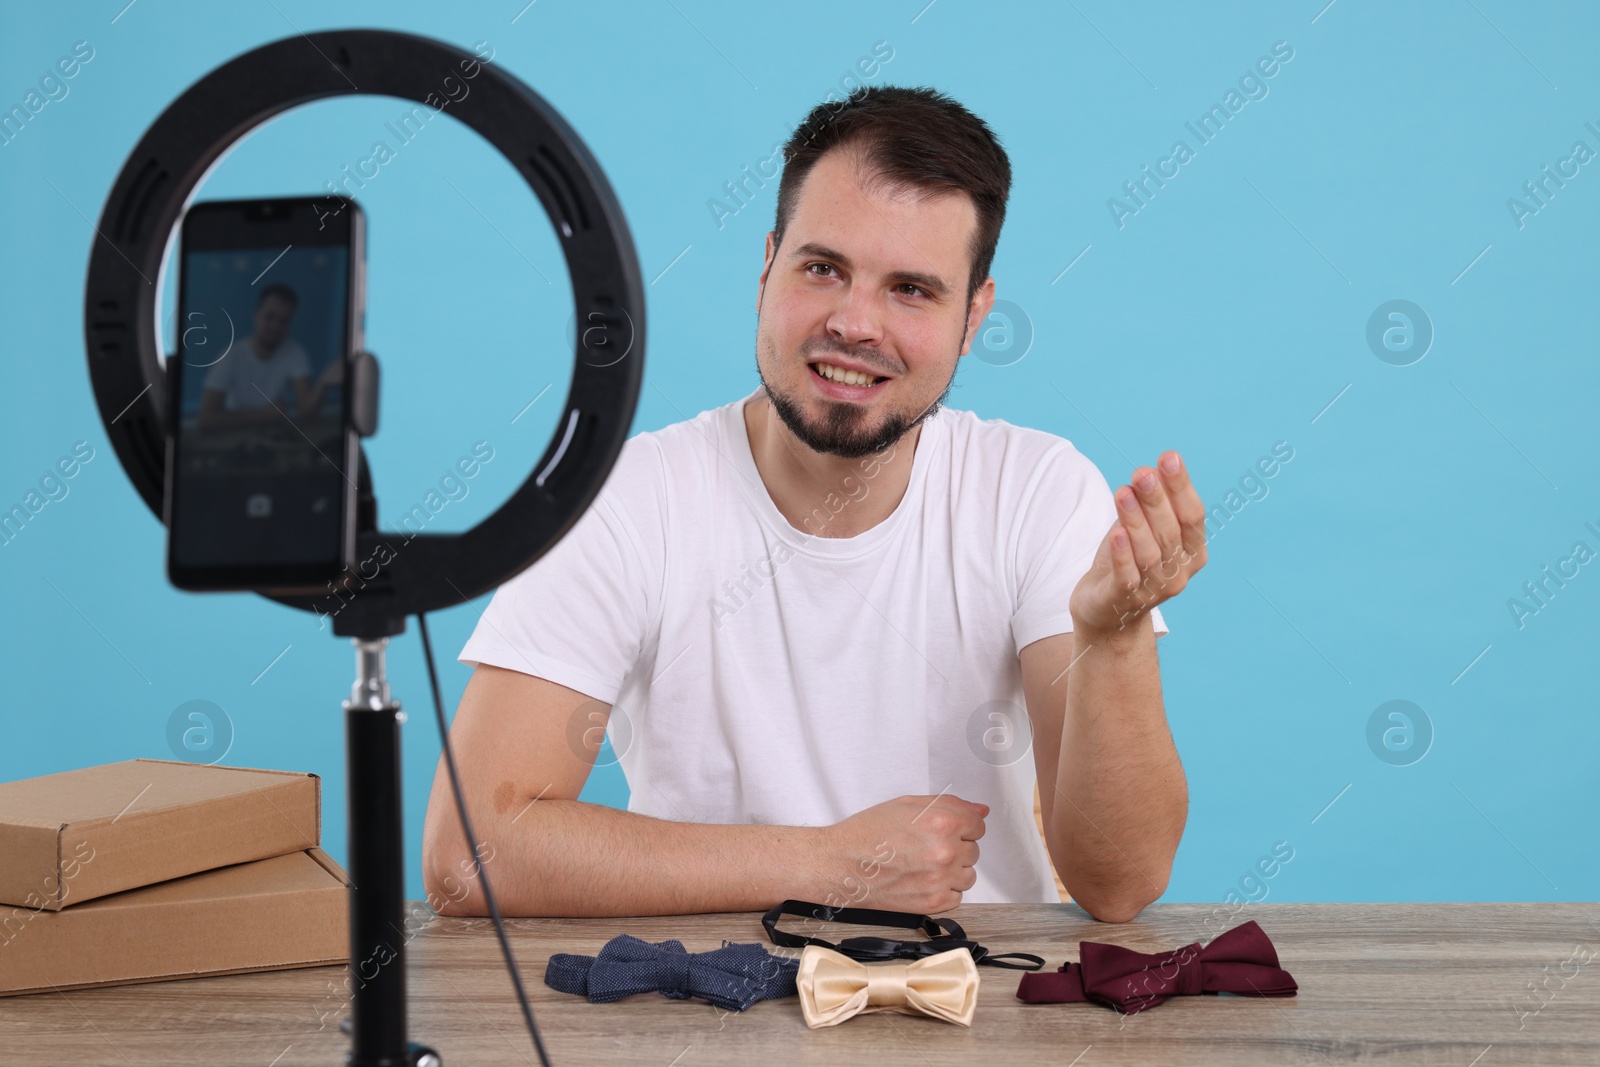 Photo of Smiling fashion blogger showing bow ties while recording video at table against light blue background